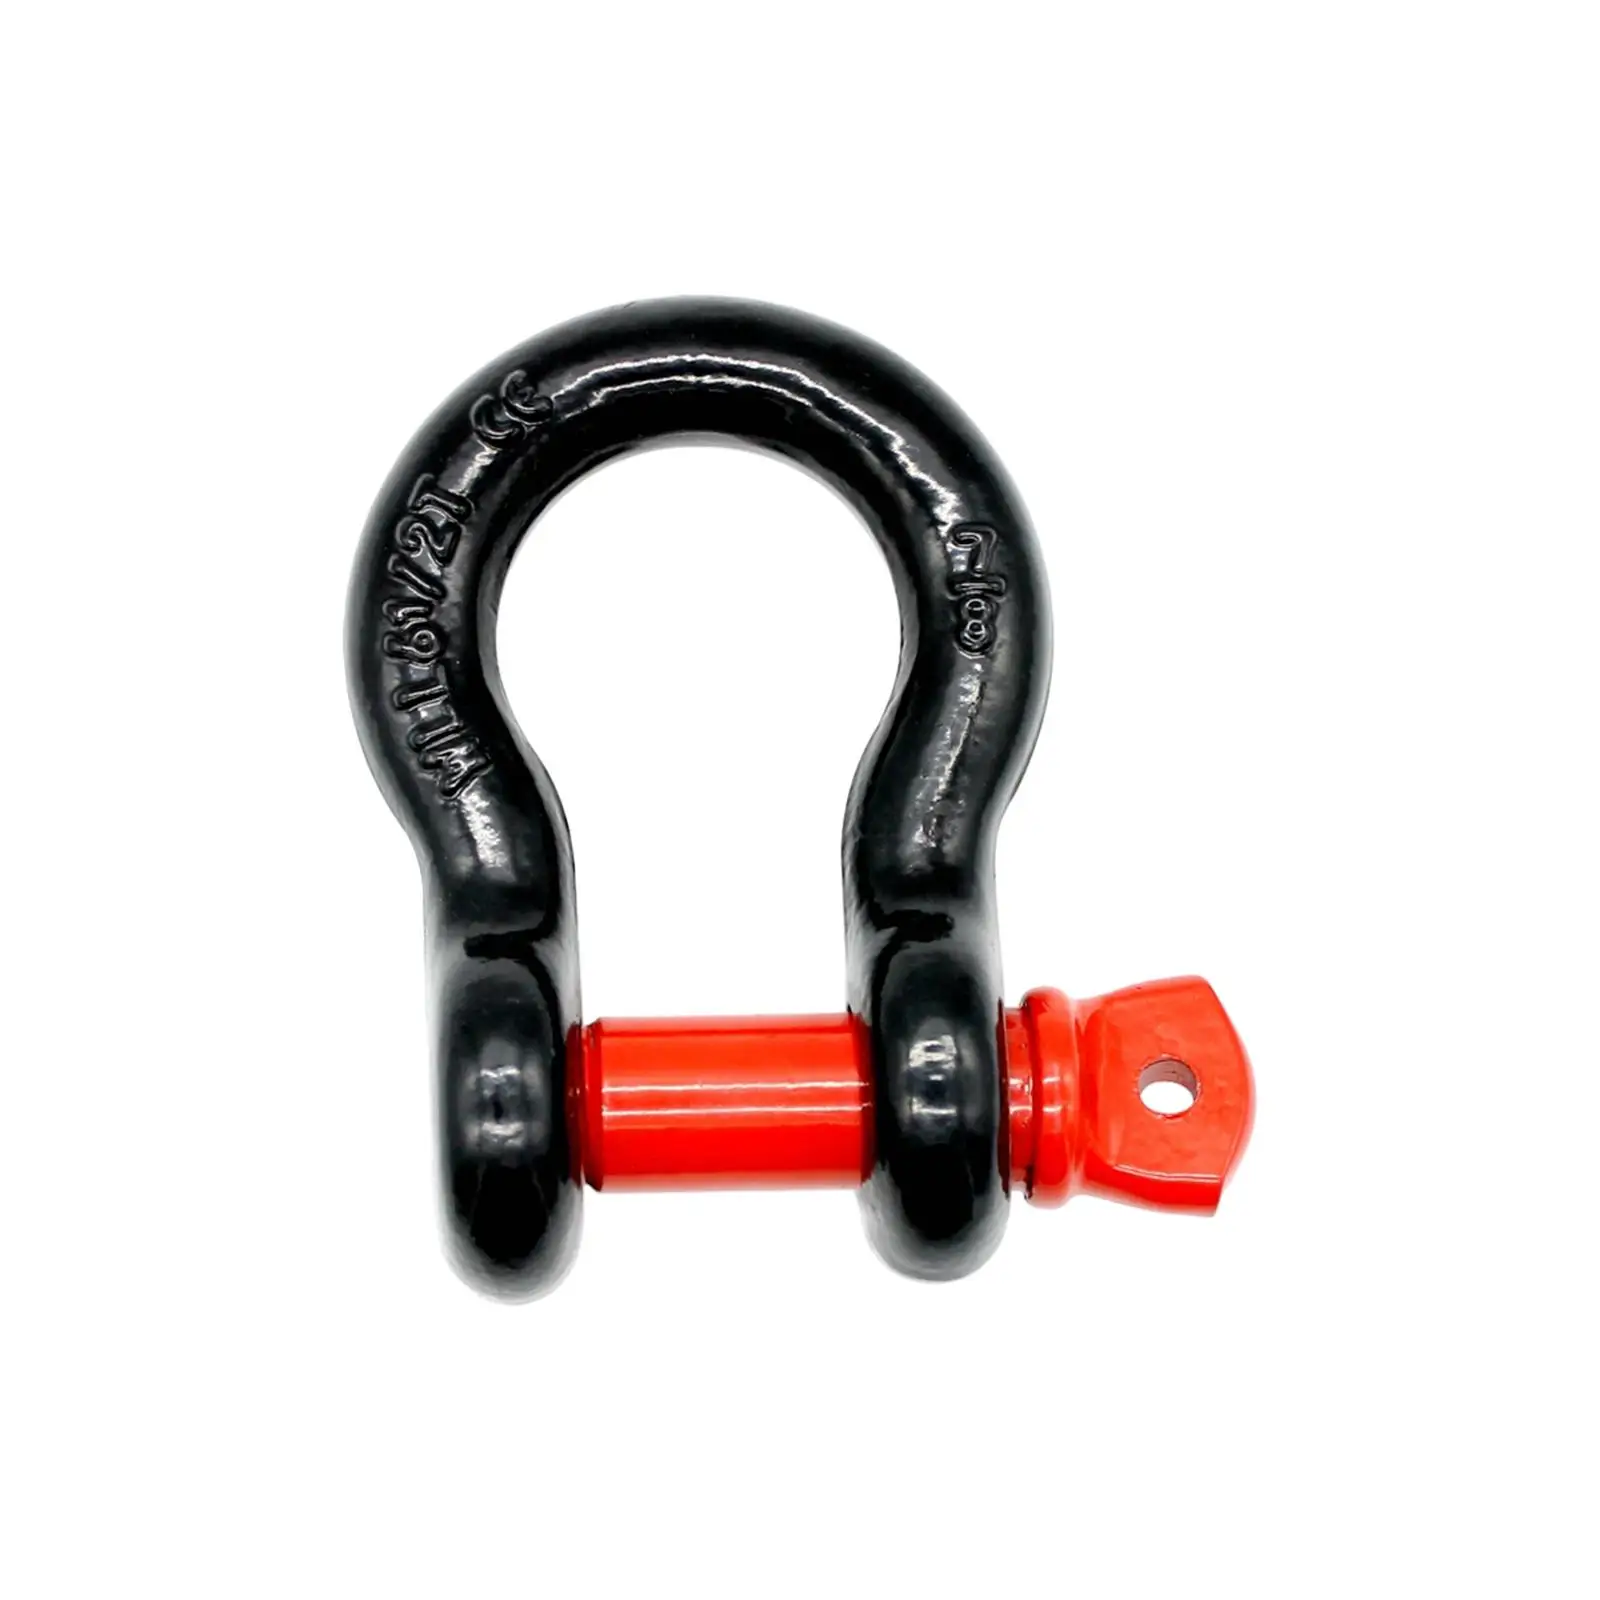 Car Tow Hook Ring 6.5T 23mm D Ring Shackle for Truck Car Trailer Hitch Vehicle Recovery Vehicle Repair Parts premium